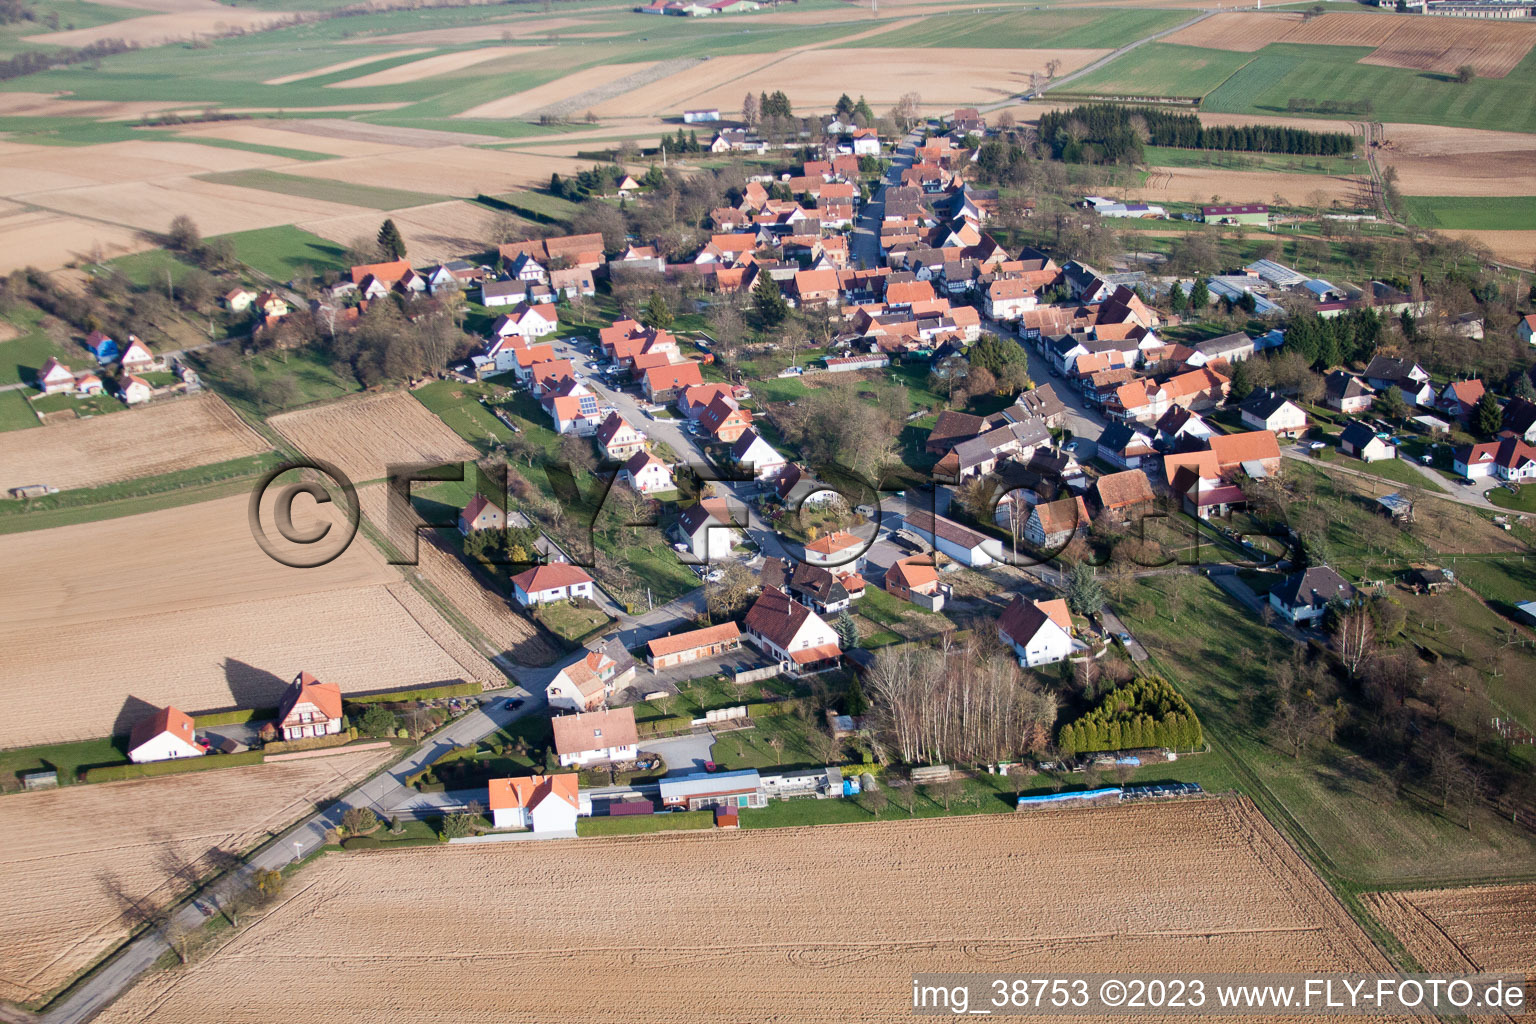 Retschwiller in the state Bas-Rhin, France seen from above